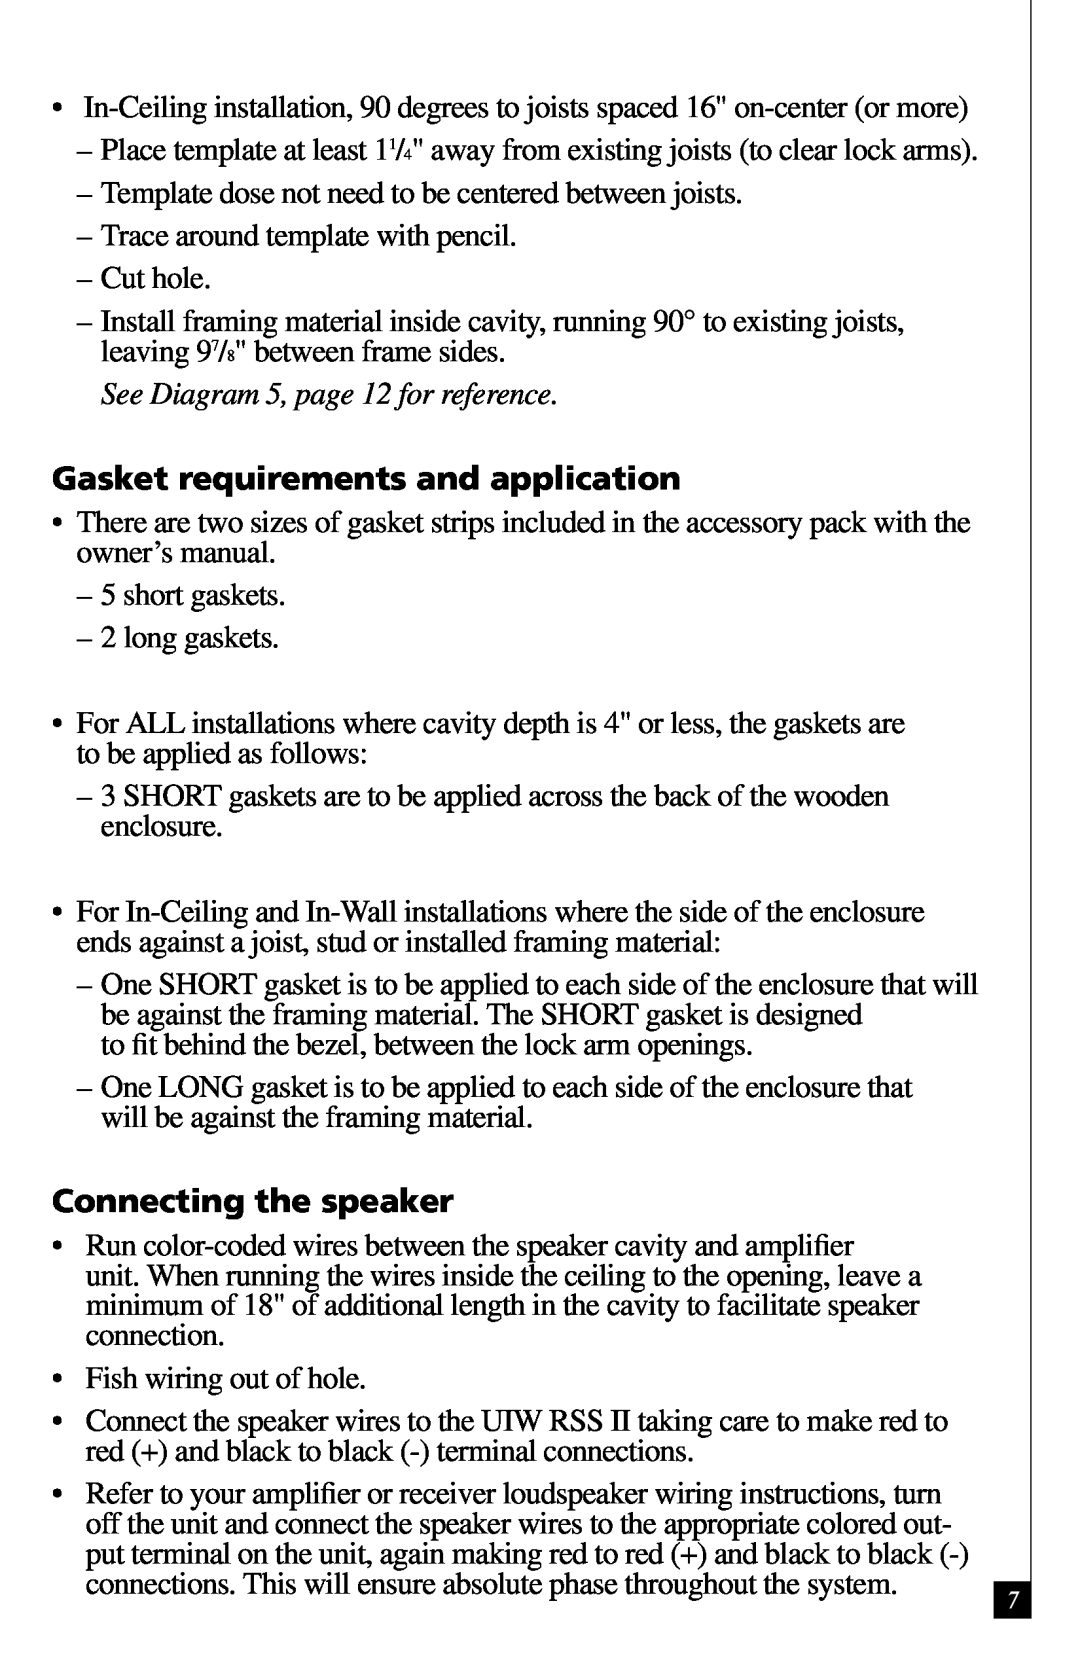 Definitive Technology RSS II owner manual Gasket requirements and application, Connecting the speaker 